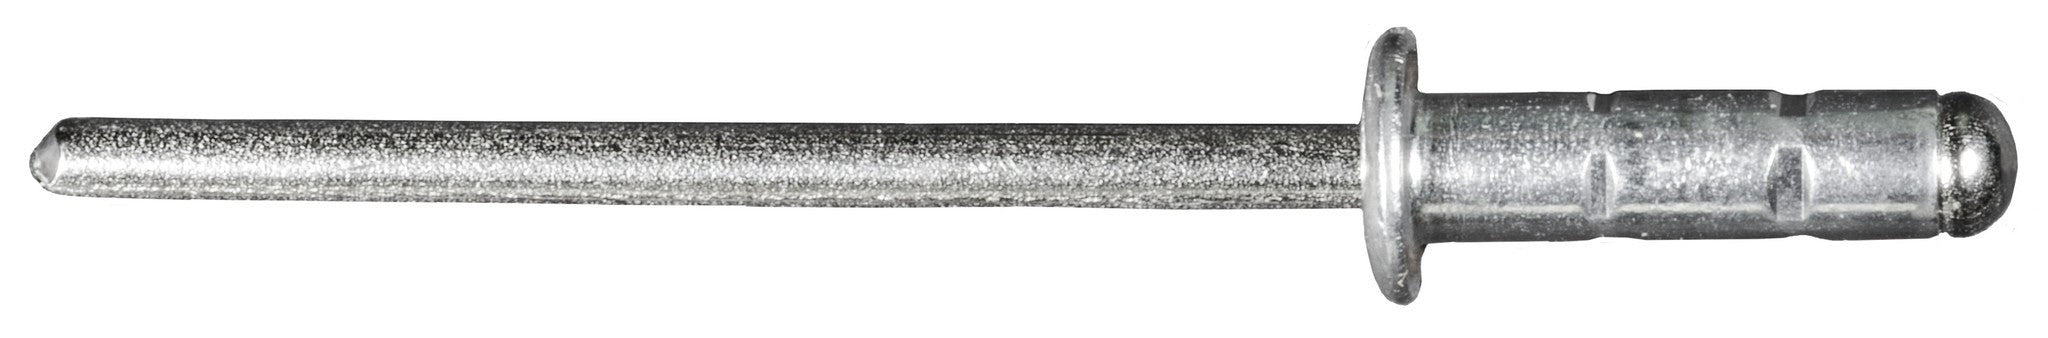 Auveco 22089 GM Specialty Rivet, Aluminum And Stainless Steel, 5/32 Dia , 9/32 Flange, 11/64-11/32 Grip Qty 25 